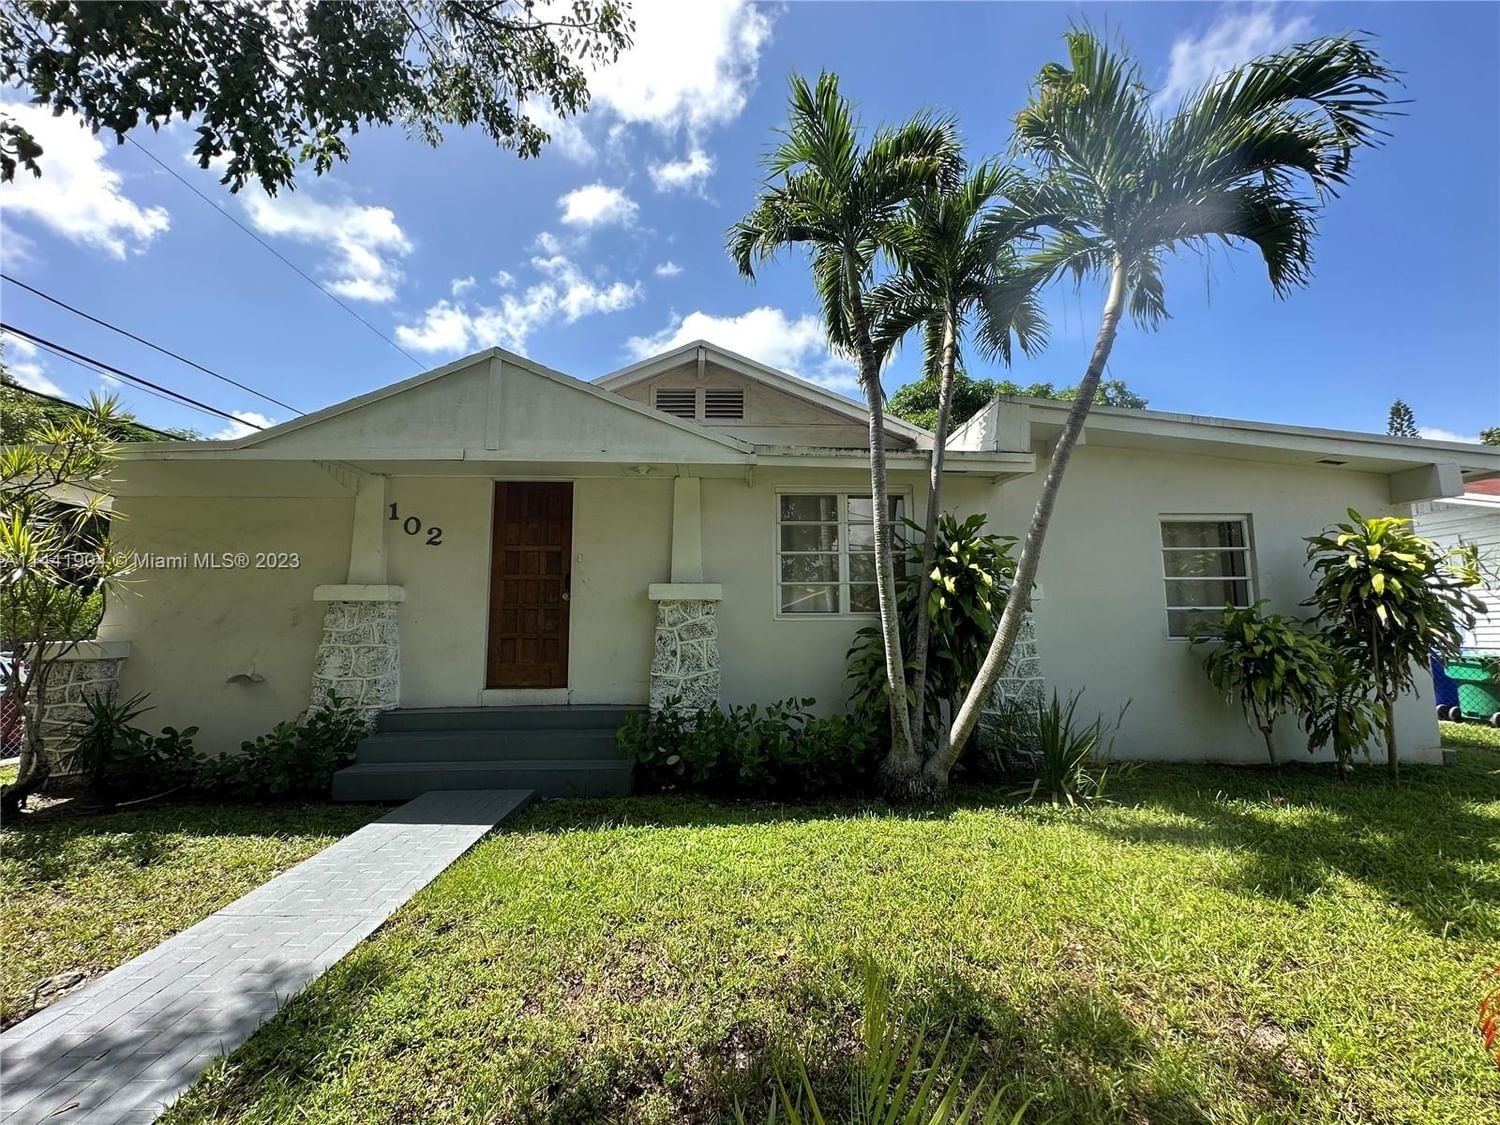 Real estate property located at 102 33rd St, Miami-Dade County, Miami, FL